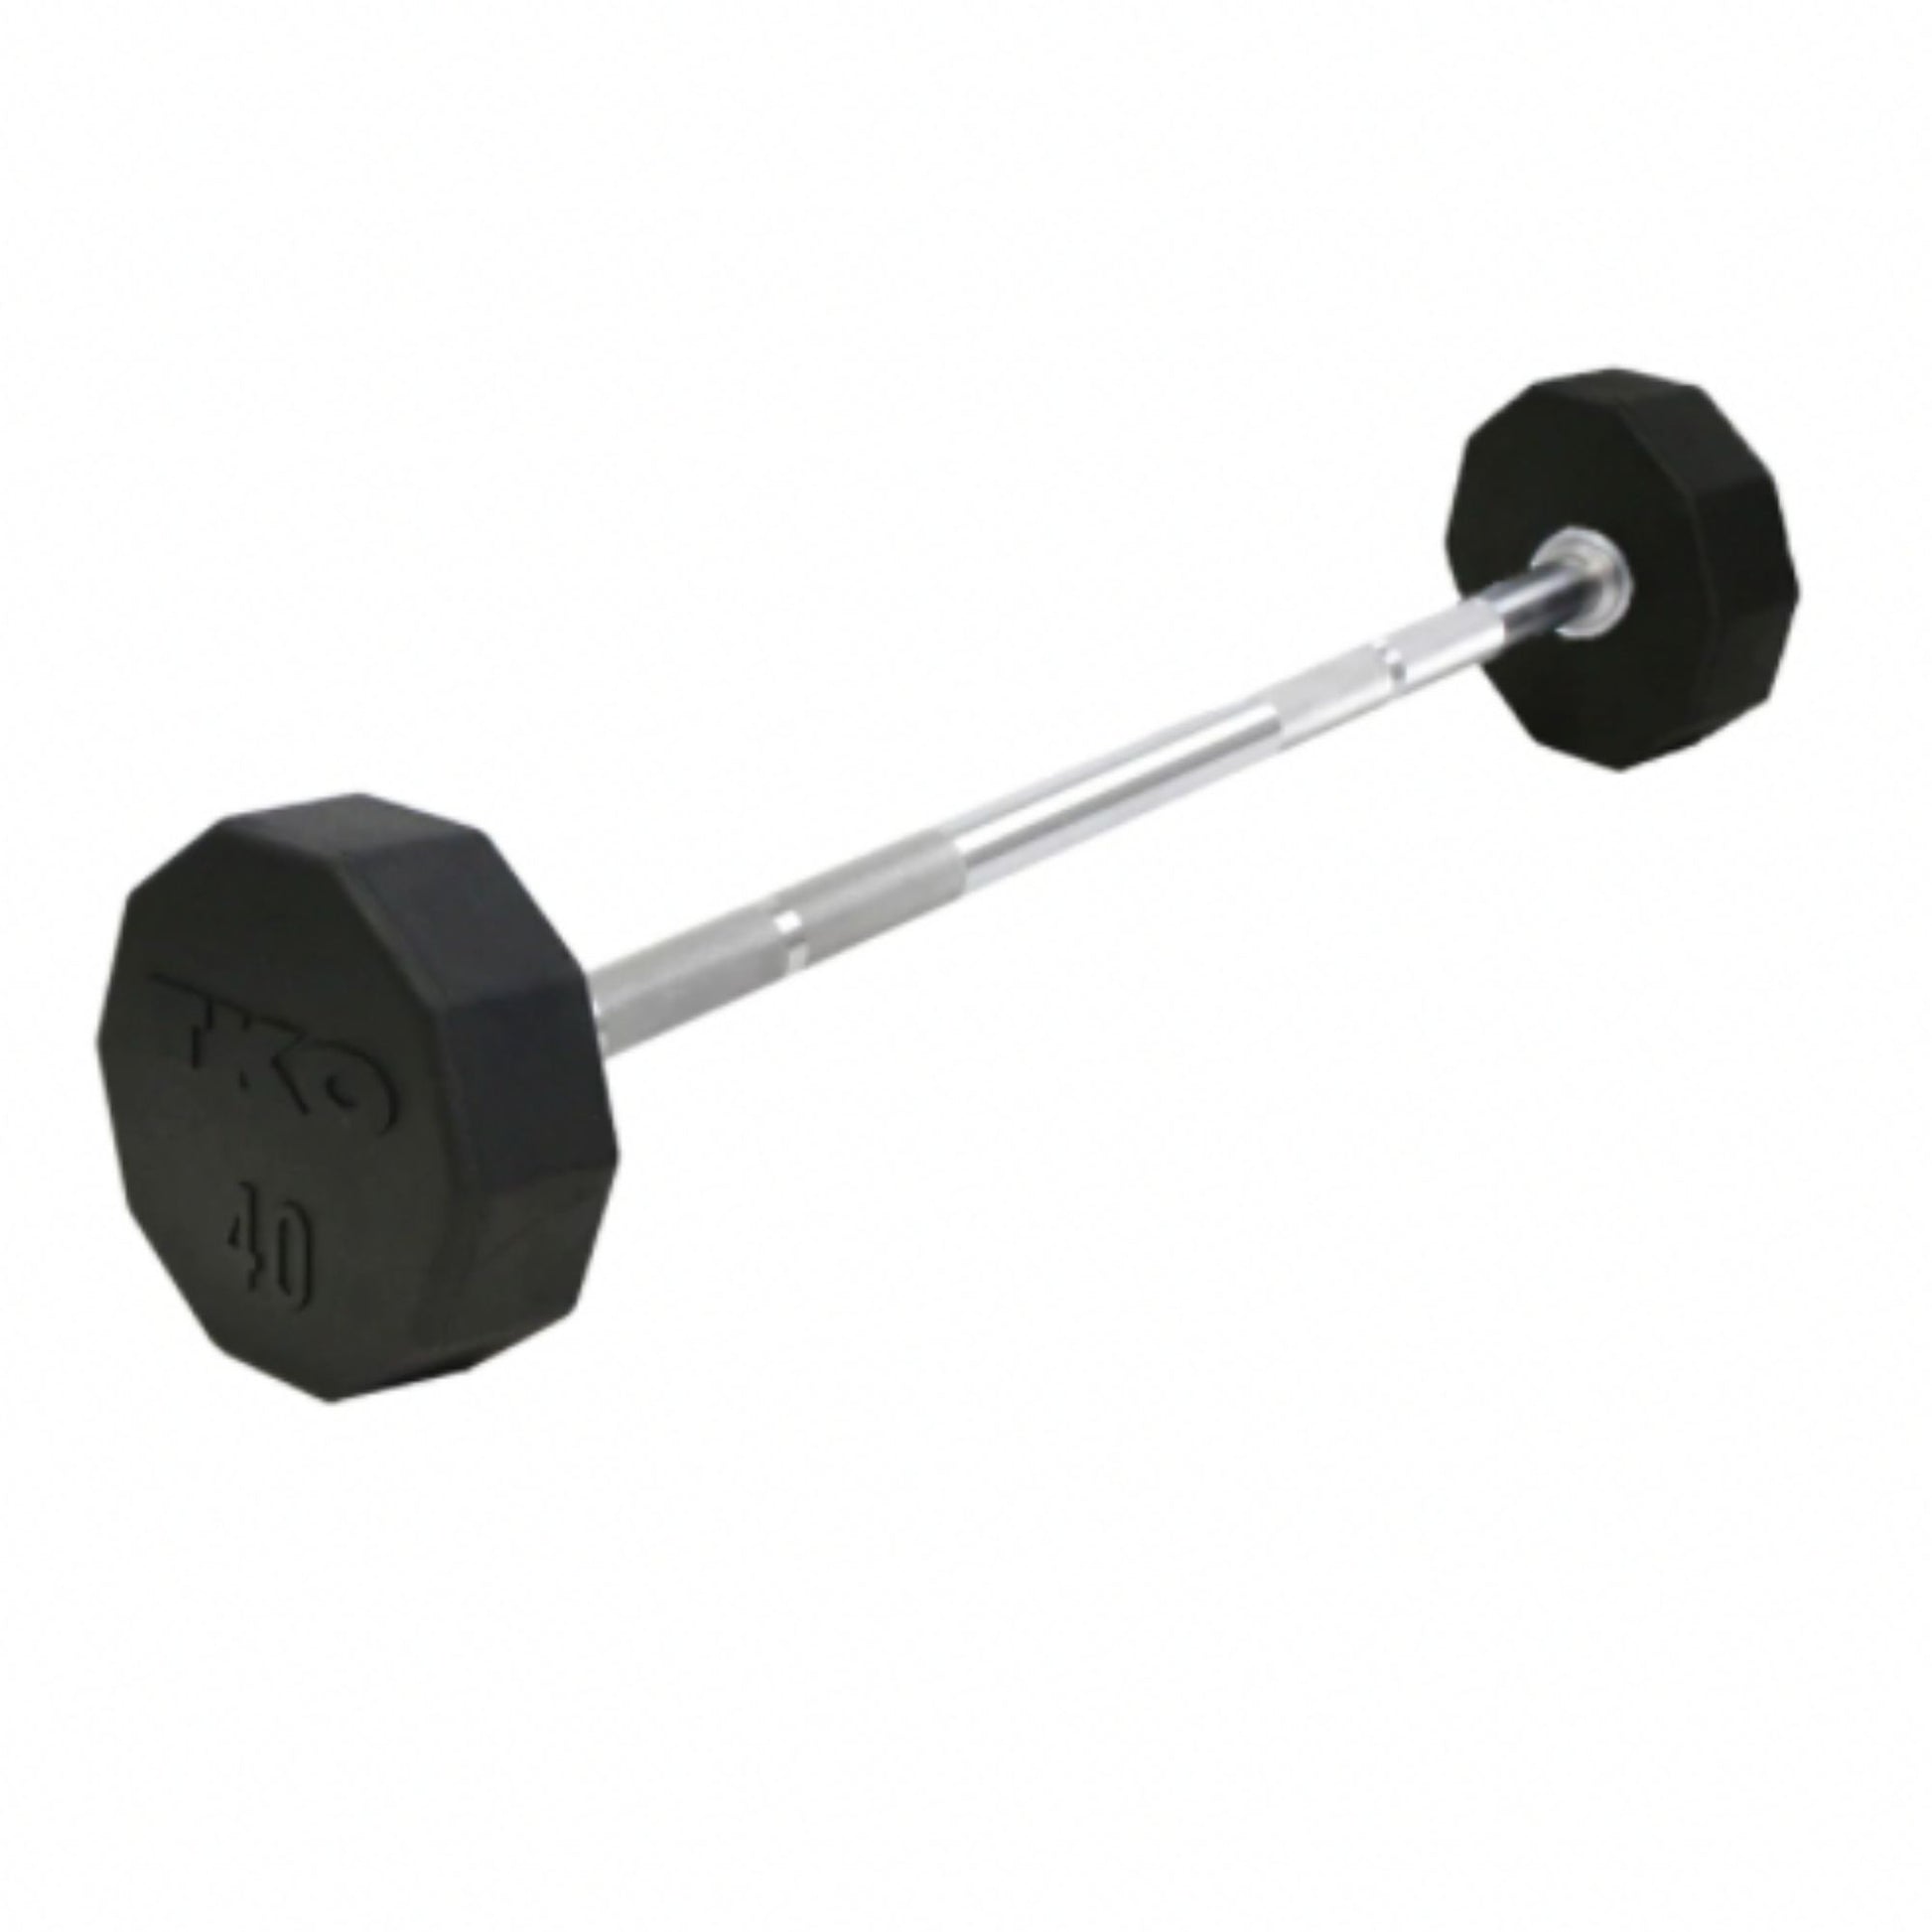 10 sided rubber fixed barbell by TKO